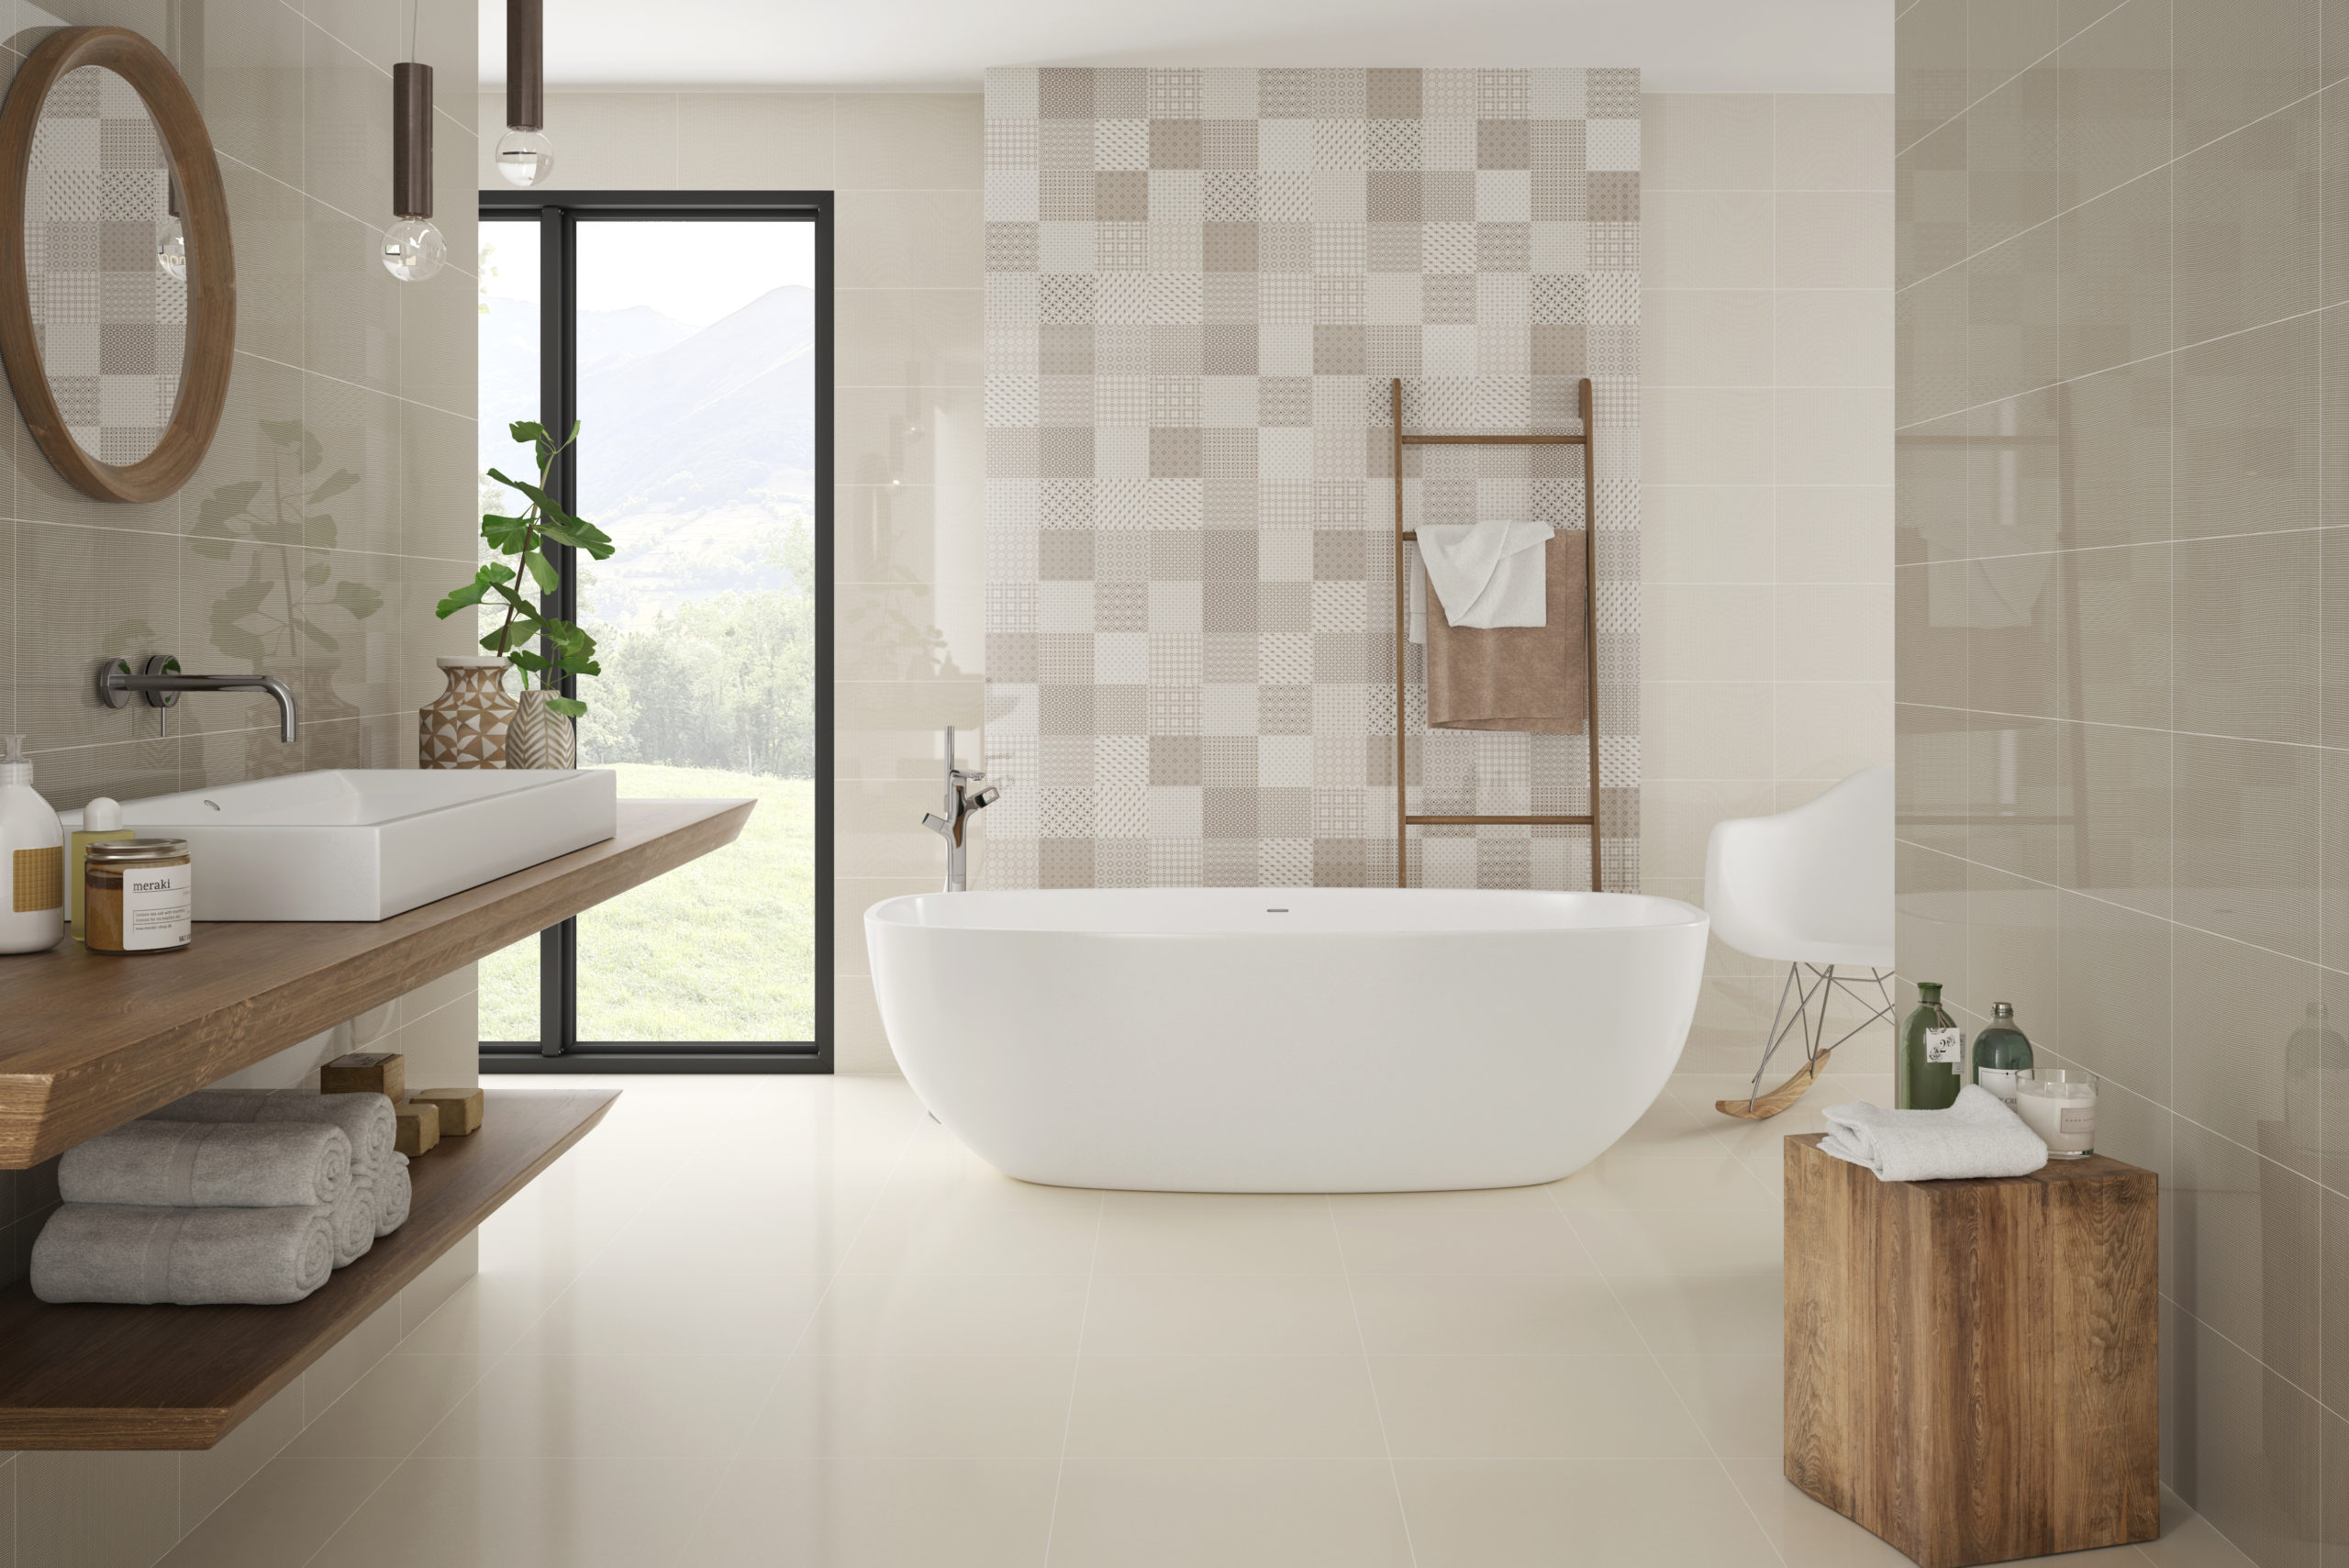 Tiles from Nemo Tile + Stone's Glow collection